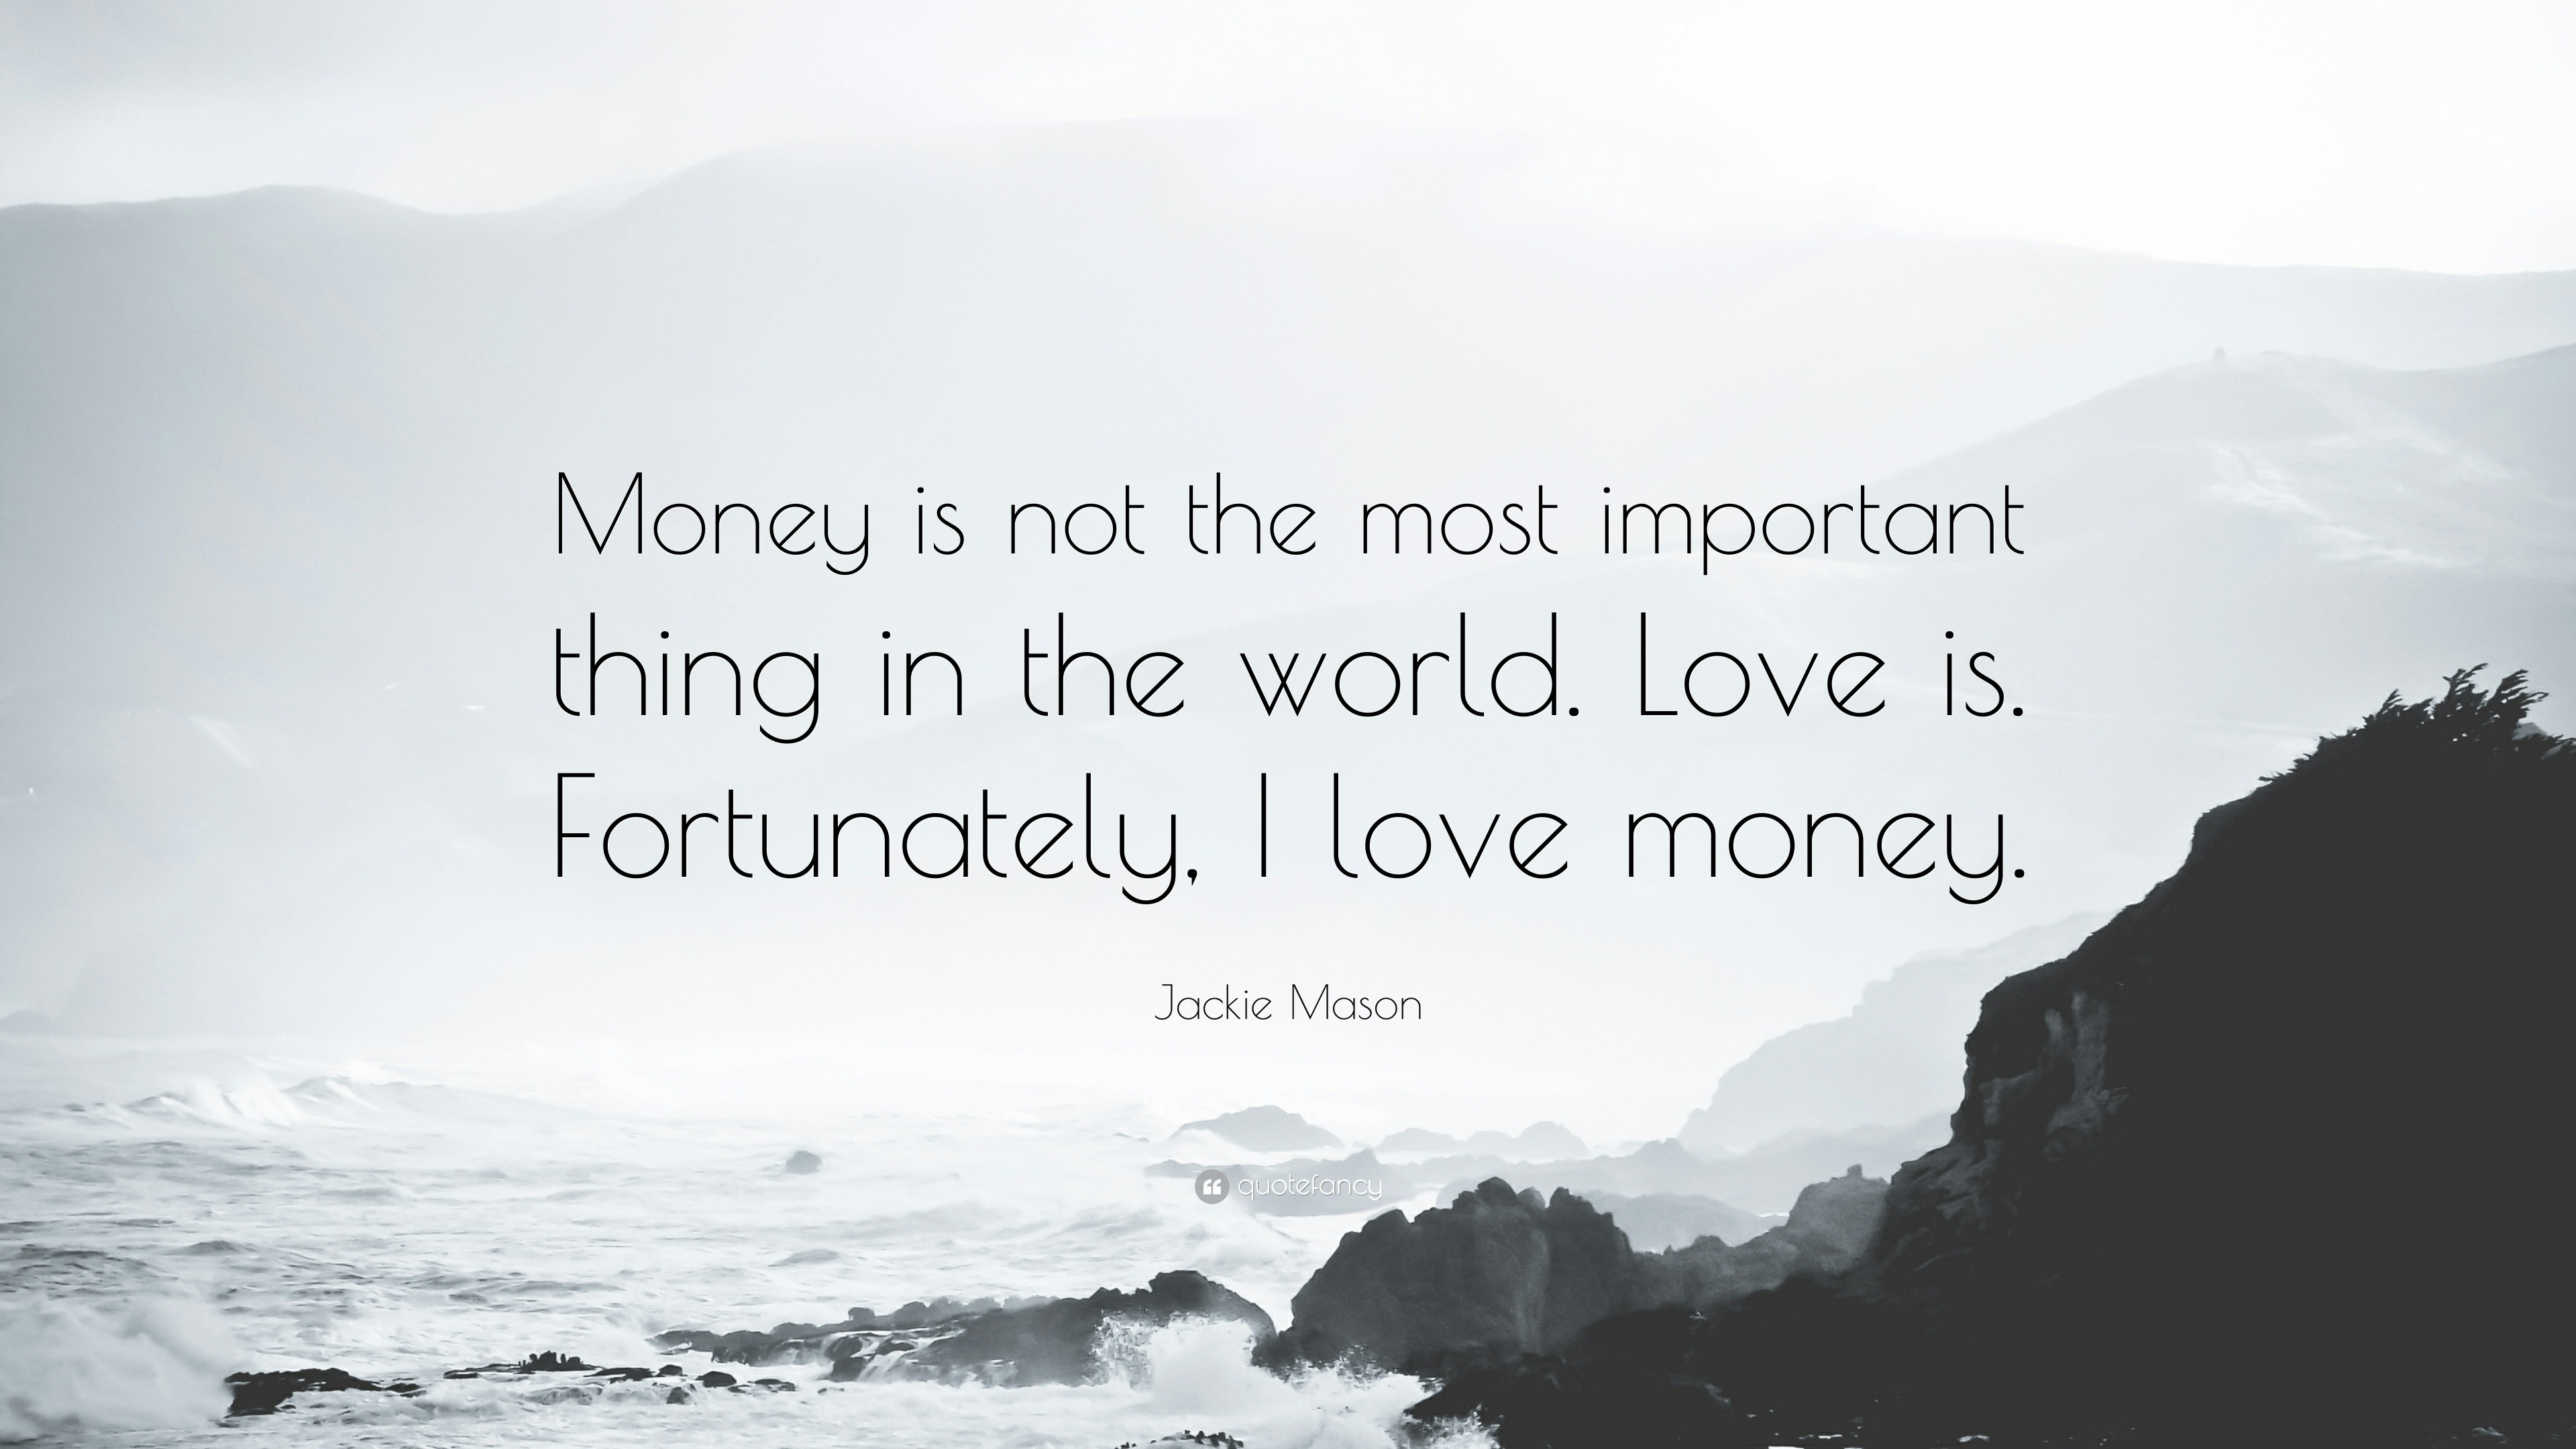 Quotes About Money “Money is not the most important thing in the world